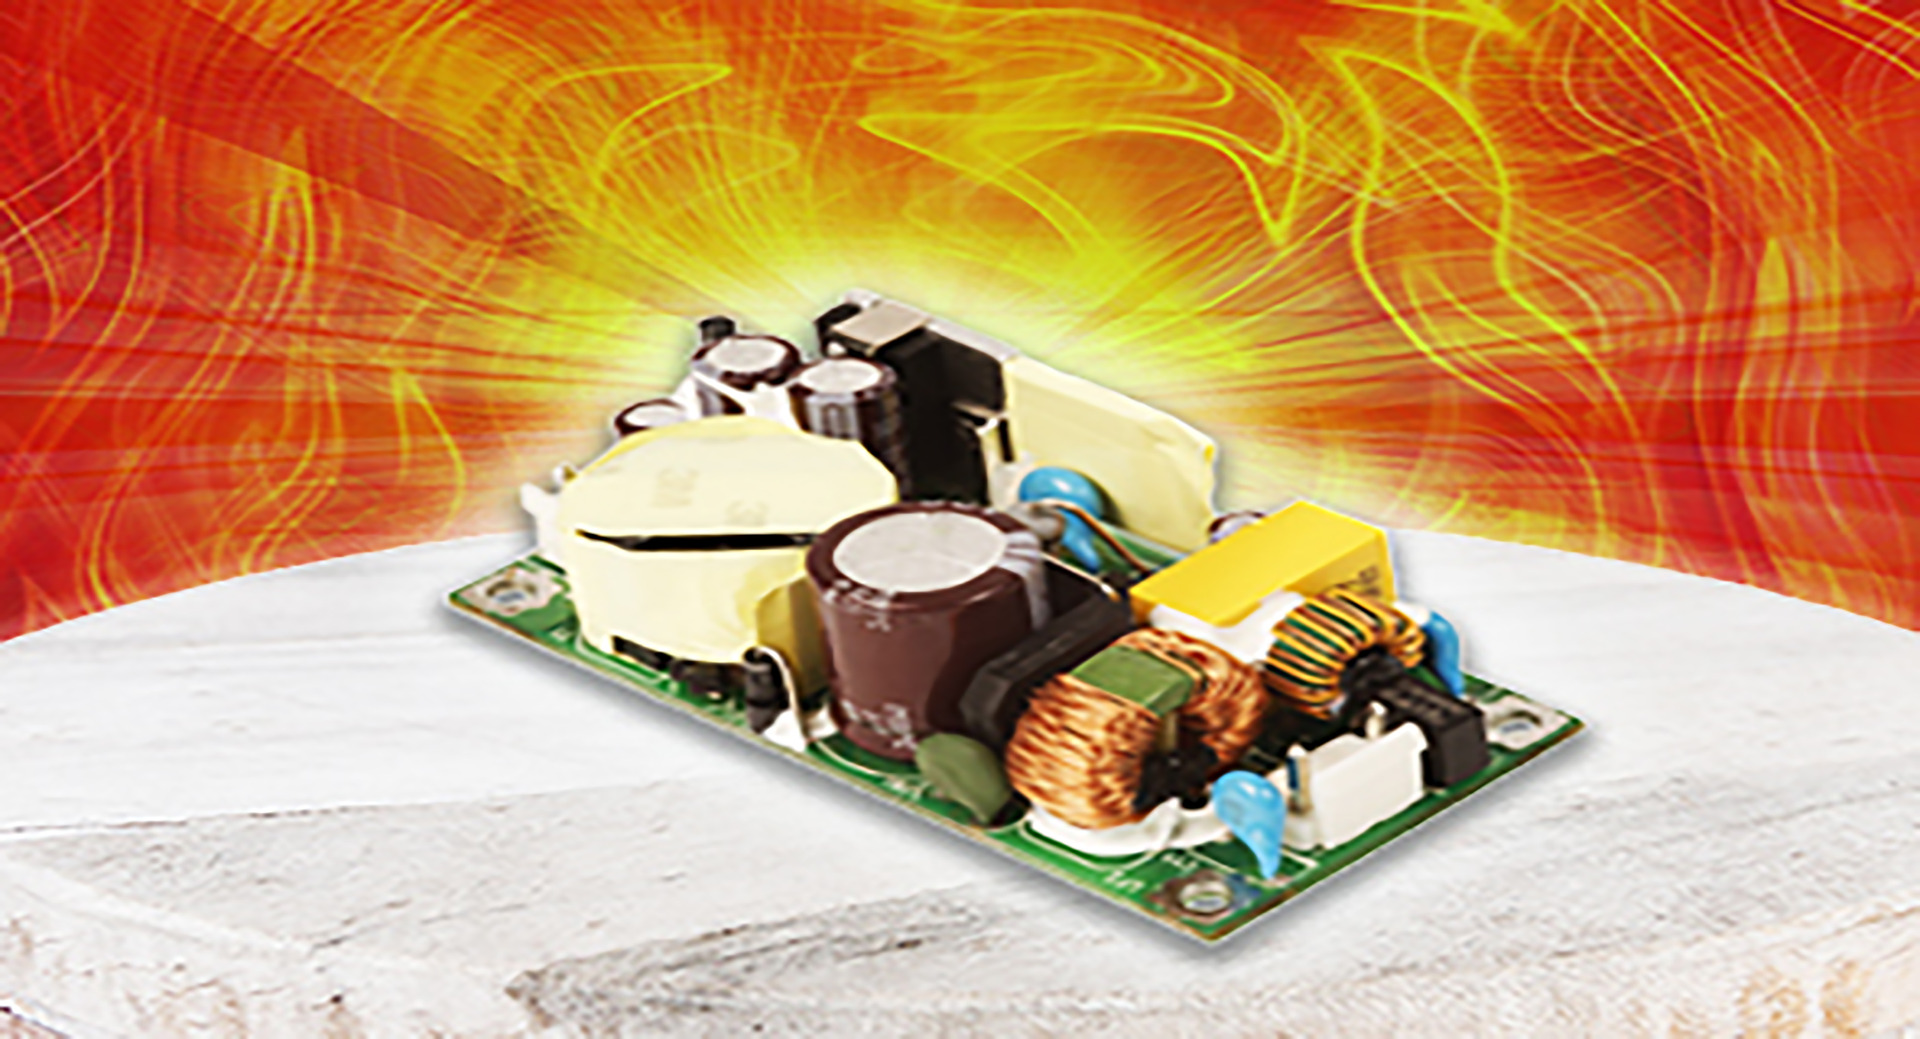 FiDUS launches the world's smallest 40W AC-DC open frame power supply